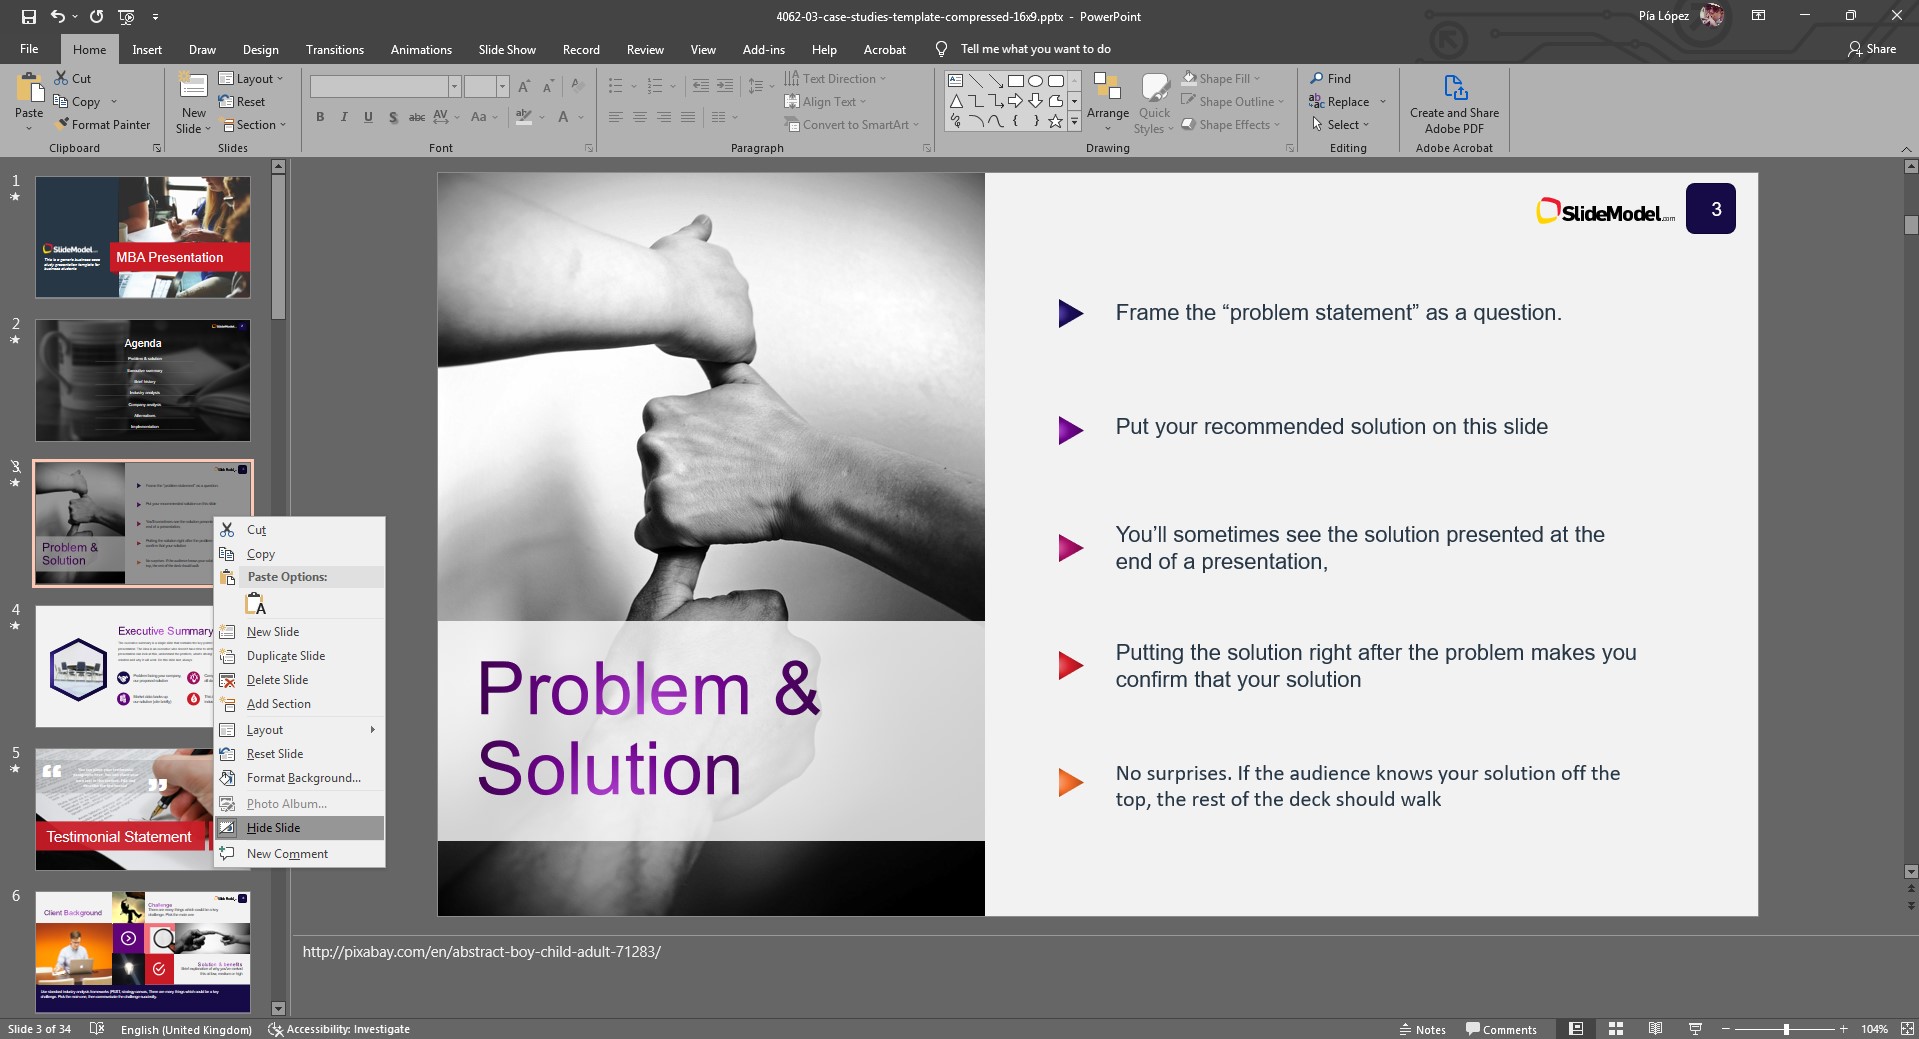 unhiding a slide in PowerPoint